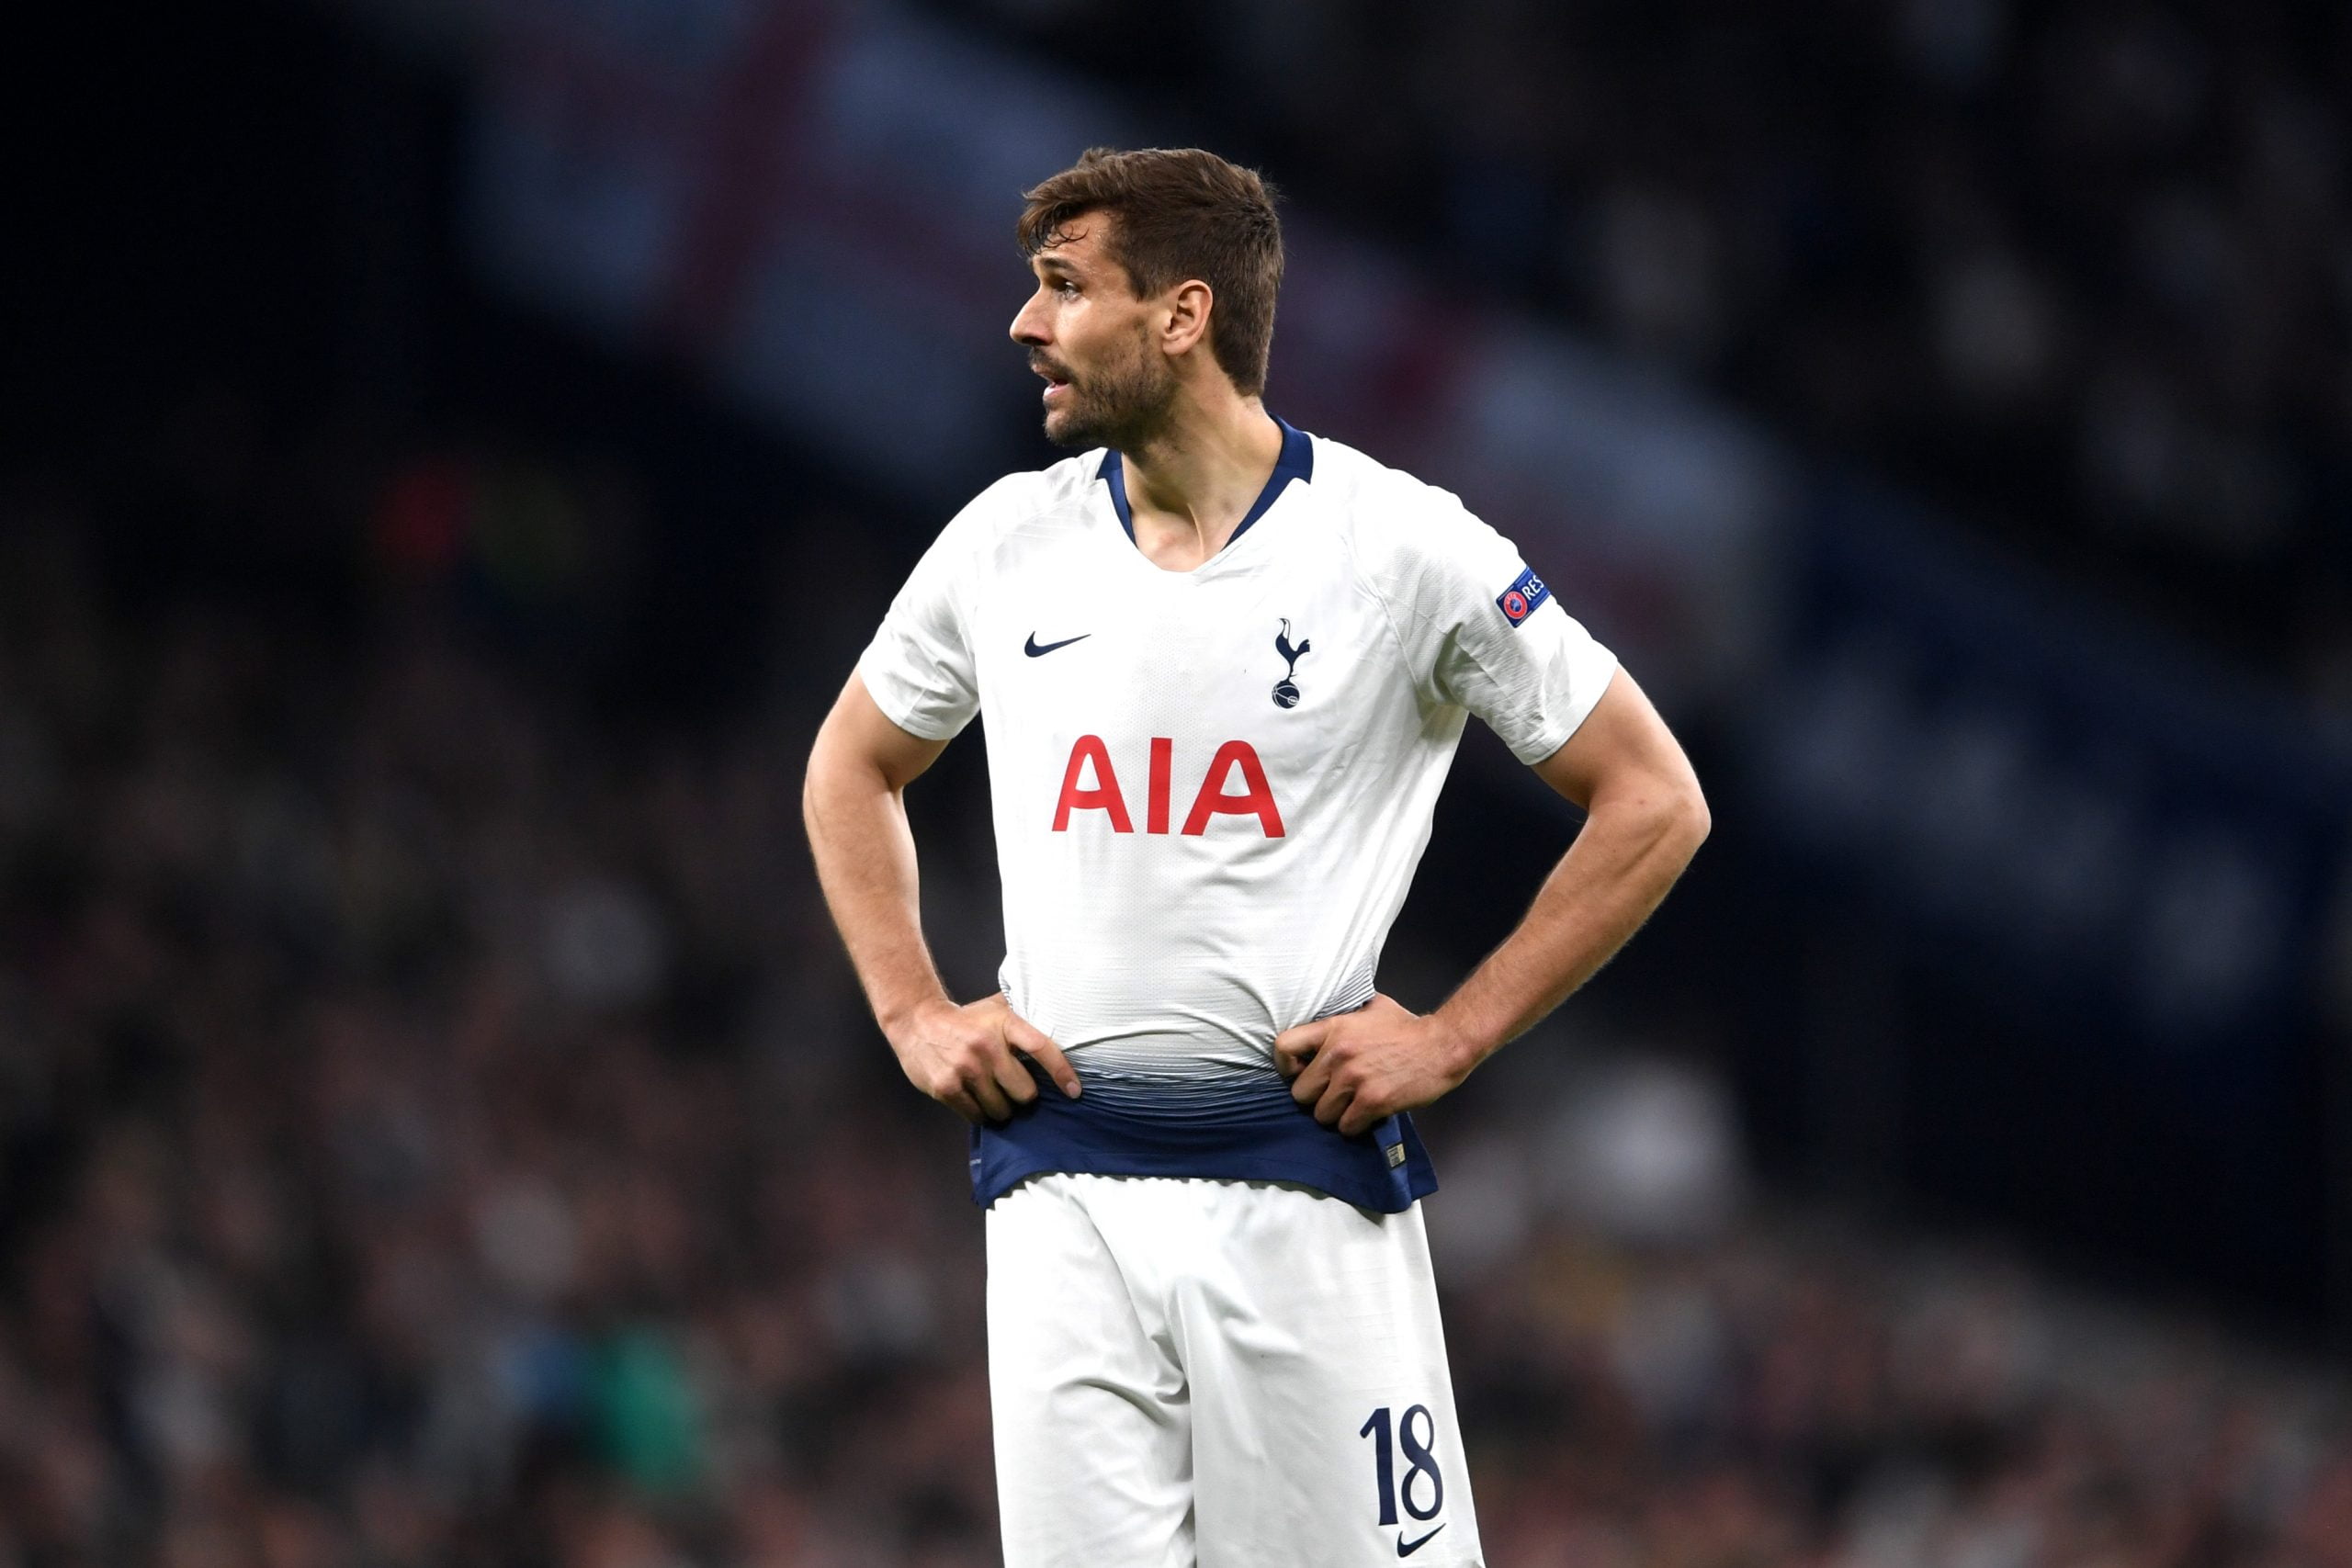 LONDON, ENGLAND - APRIL 30: Fernando Llorente of Tottenham Hotspur looks on during the UEFA Champions League Semi Final first leg match between Tottenham Hotspur and Ajax at at the Tottenham Hotspur Stadium on April 30, 2019 in London, England. (Photo by Laurence Griffiths/Getty Images)